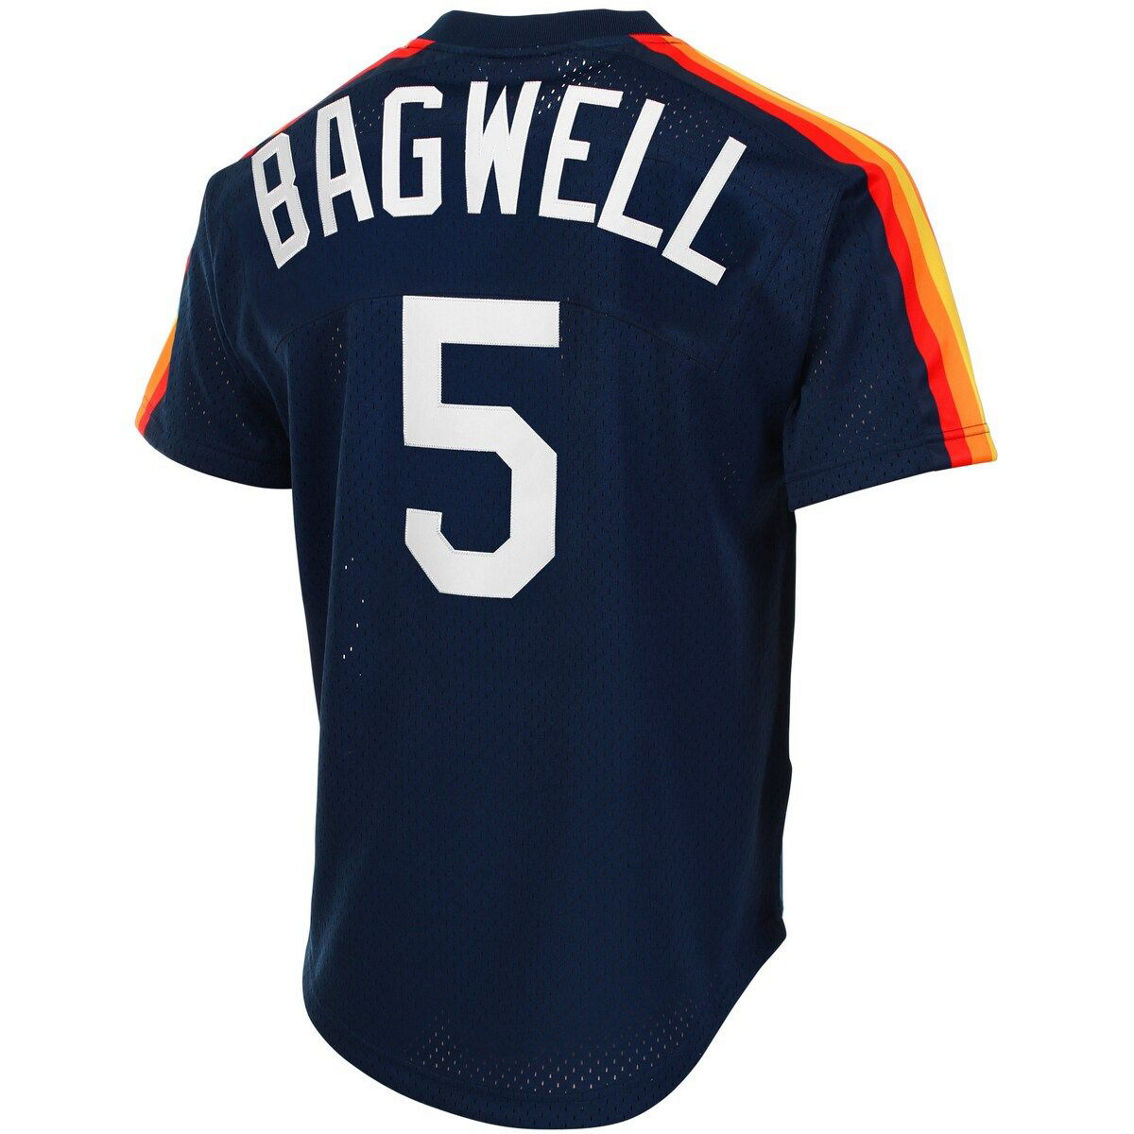 Mitchell & Ness Men's Jeff Bagwell Navy Houston Astros Cooperstown Mesh Batting Practice Jersey - Image 4 of 4